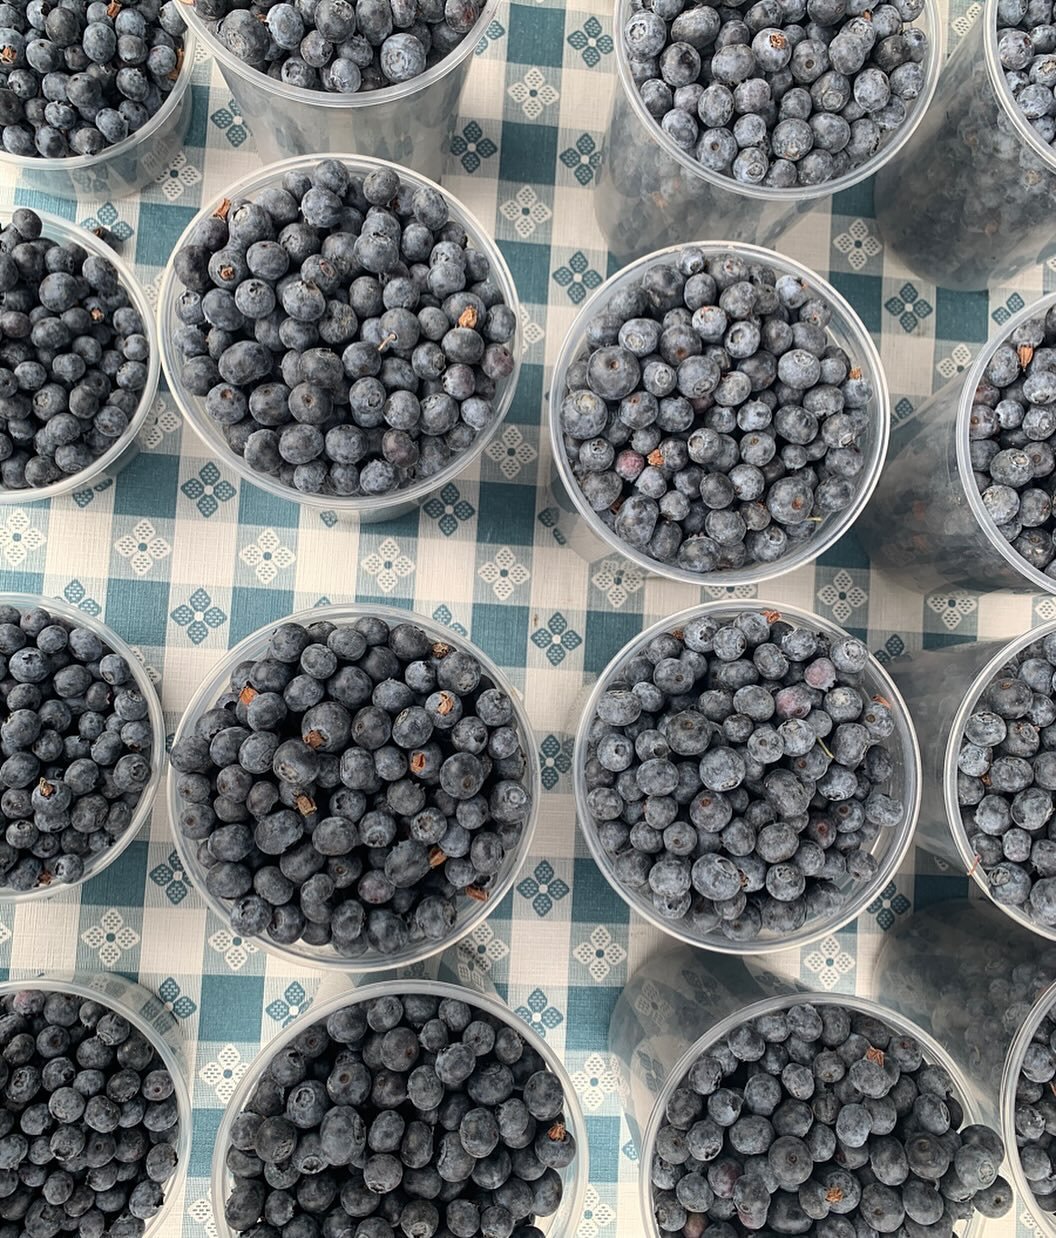 No way to feel blue when the berries are this good! Blueberries are back at the markets and we are so grateful 🫐 Be sure to thank your farmer when you see them on Thursday, Saturday or Sunday.